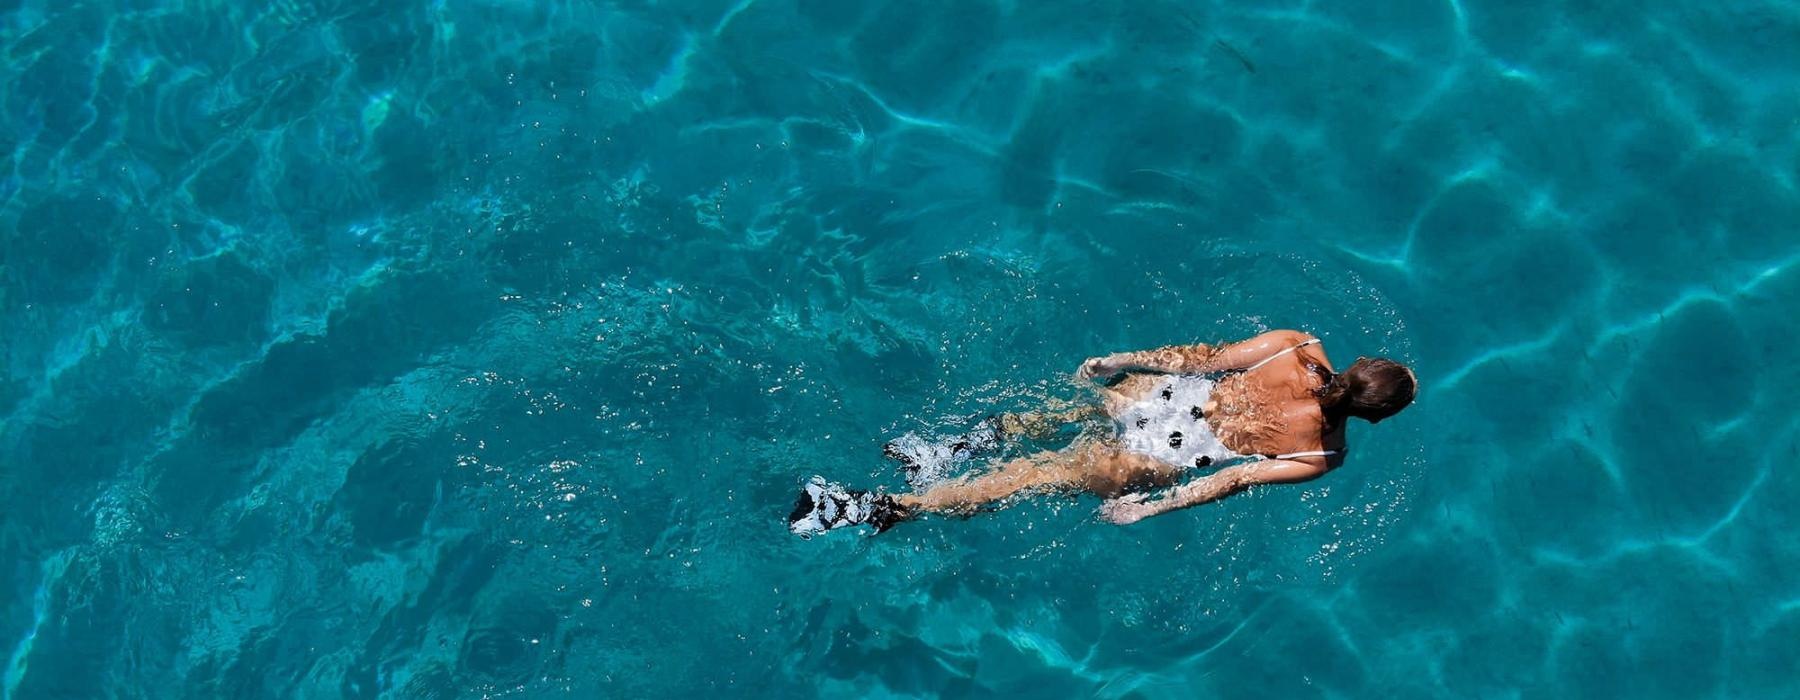 overhead shot of a woman swimming in a pool